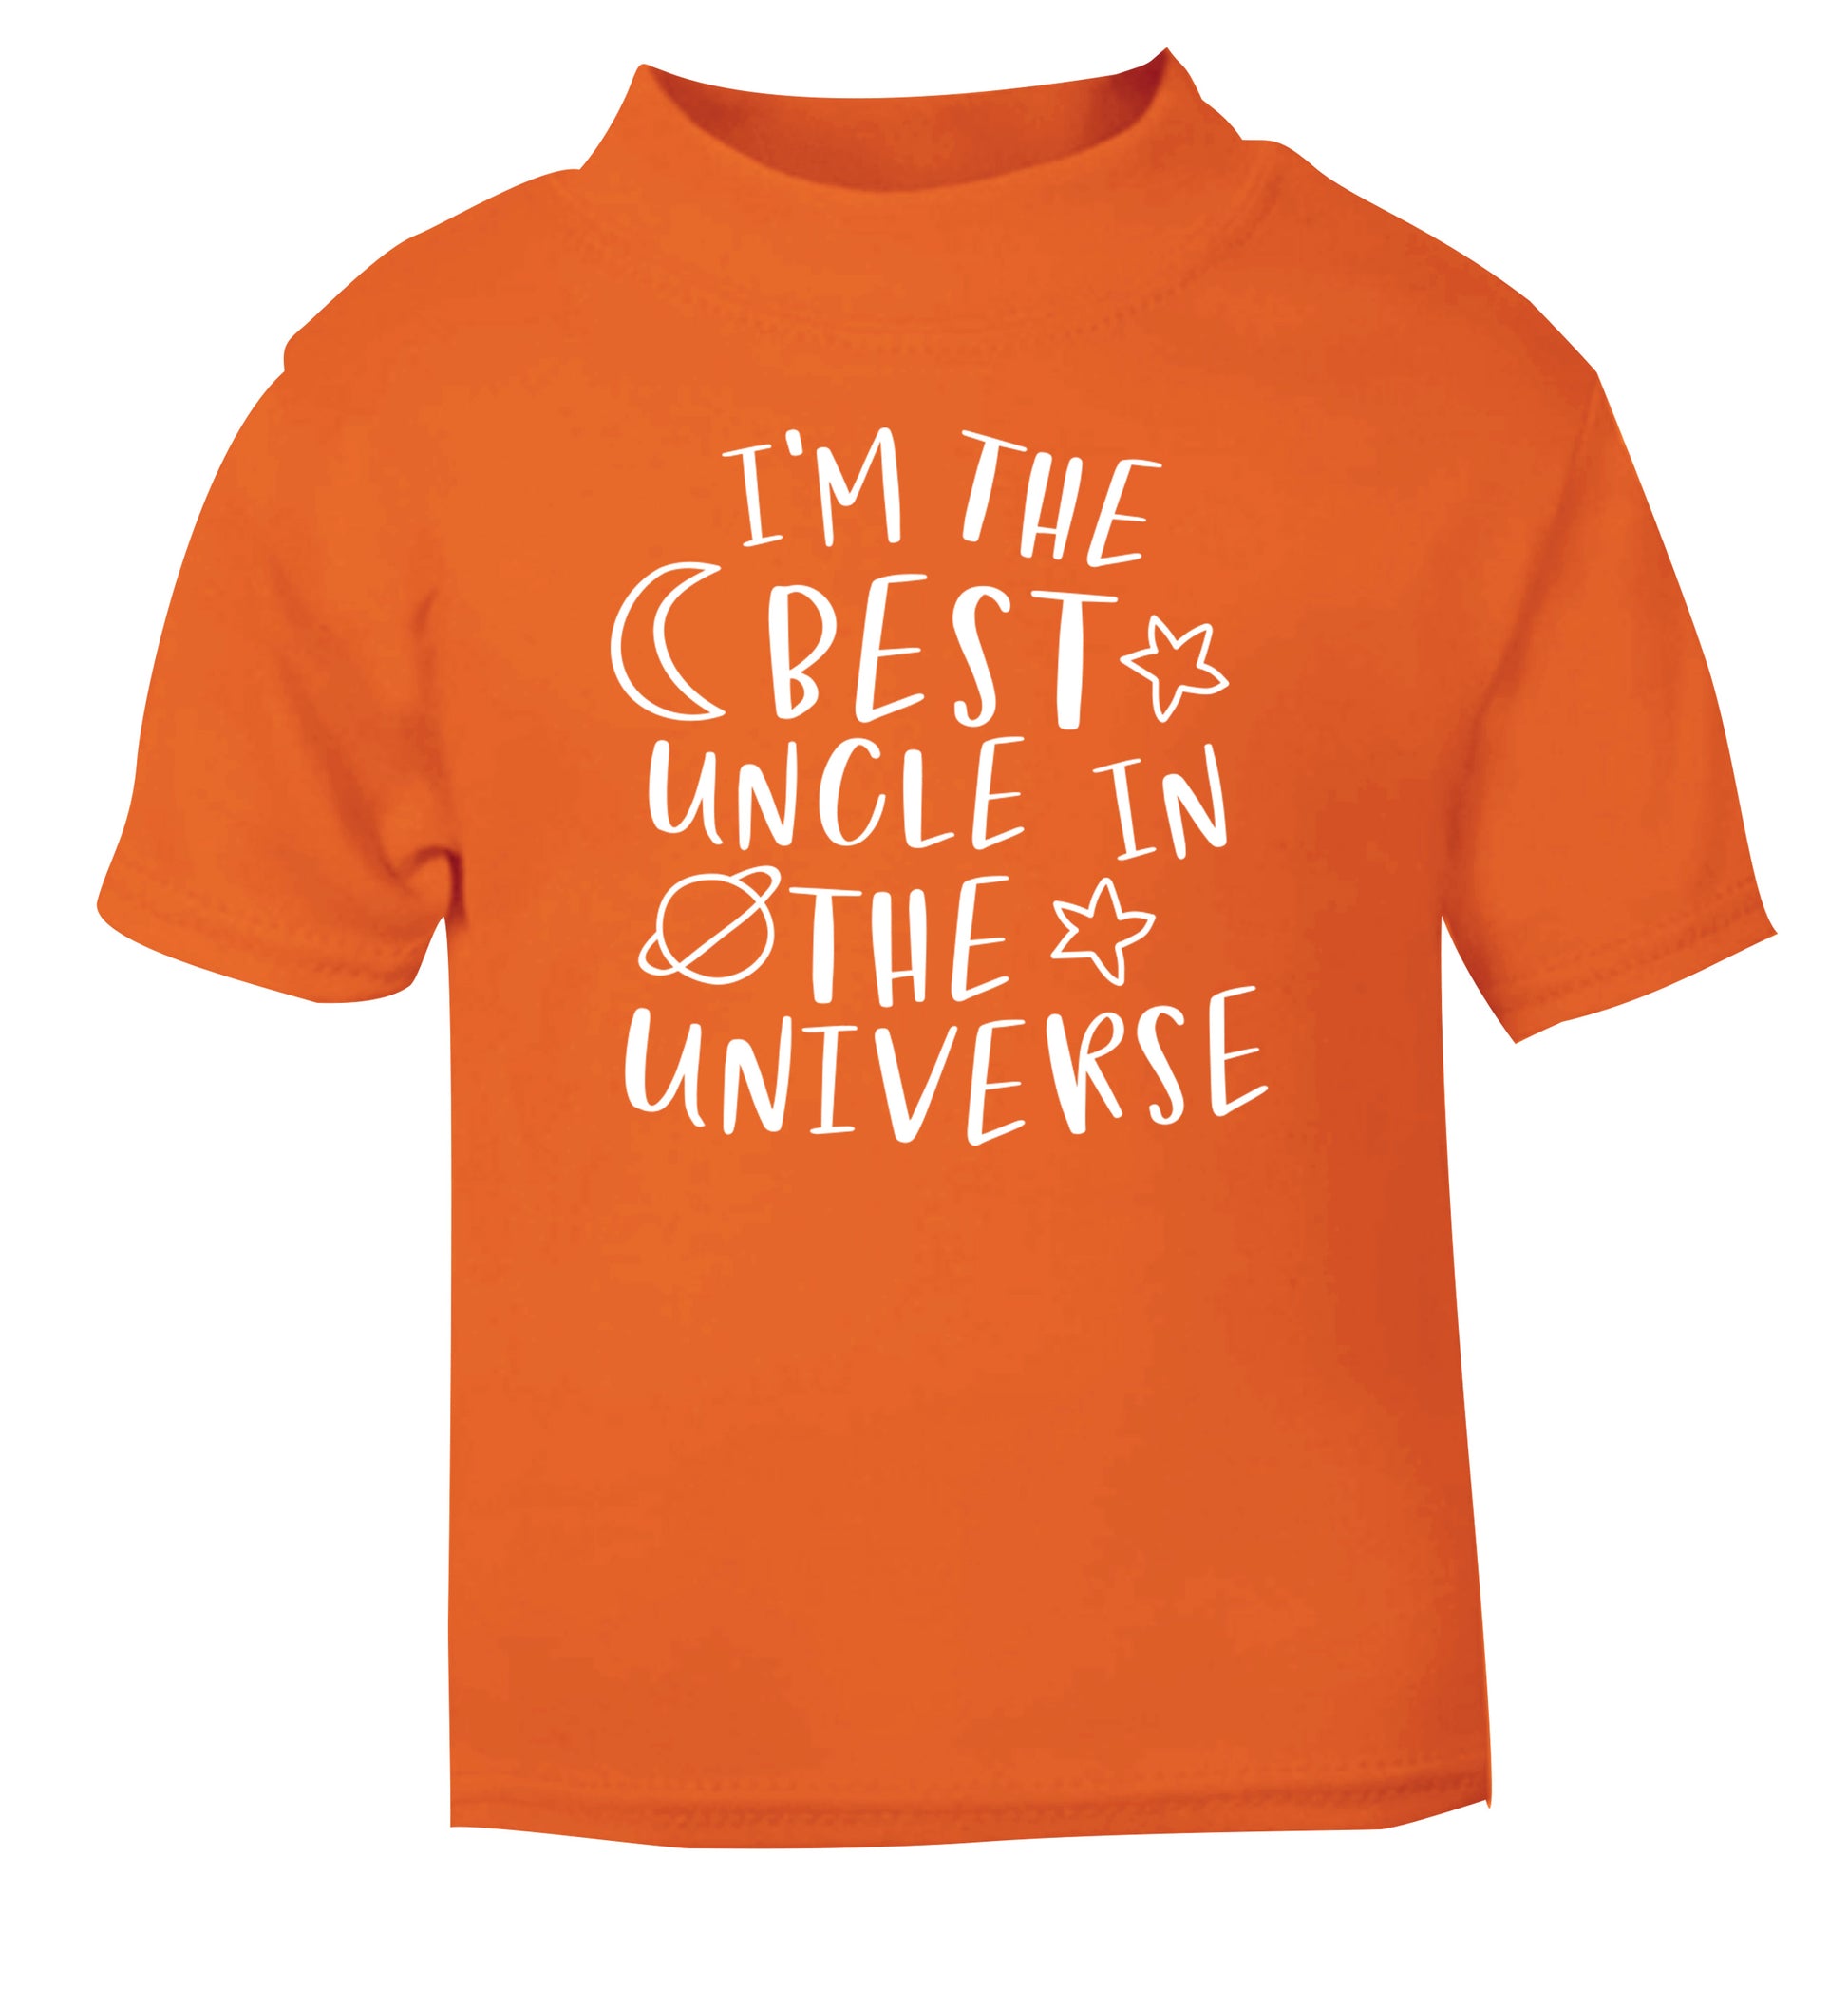 I'm the best uncle in the universe orange Baby Toddler Tshirt 2 Years